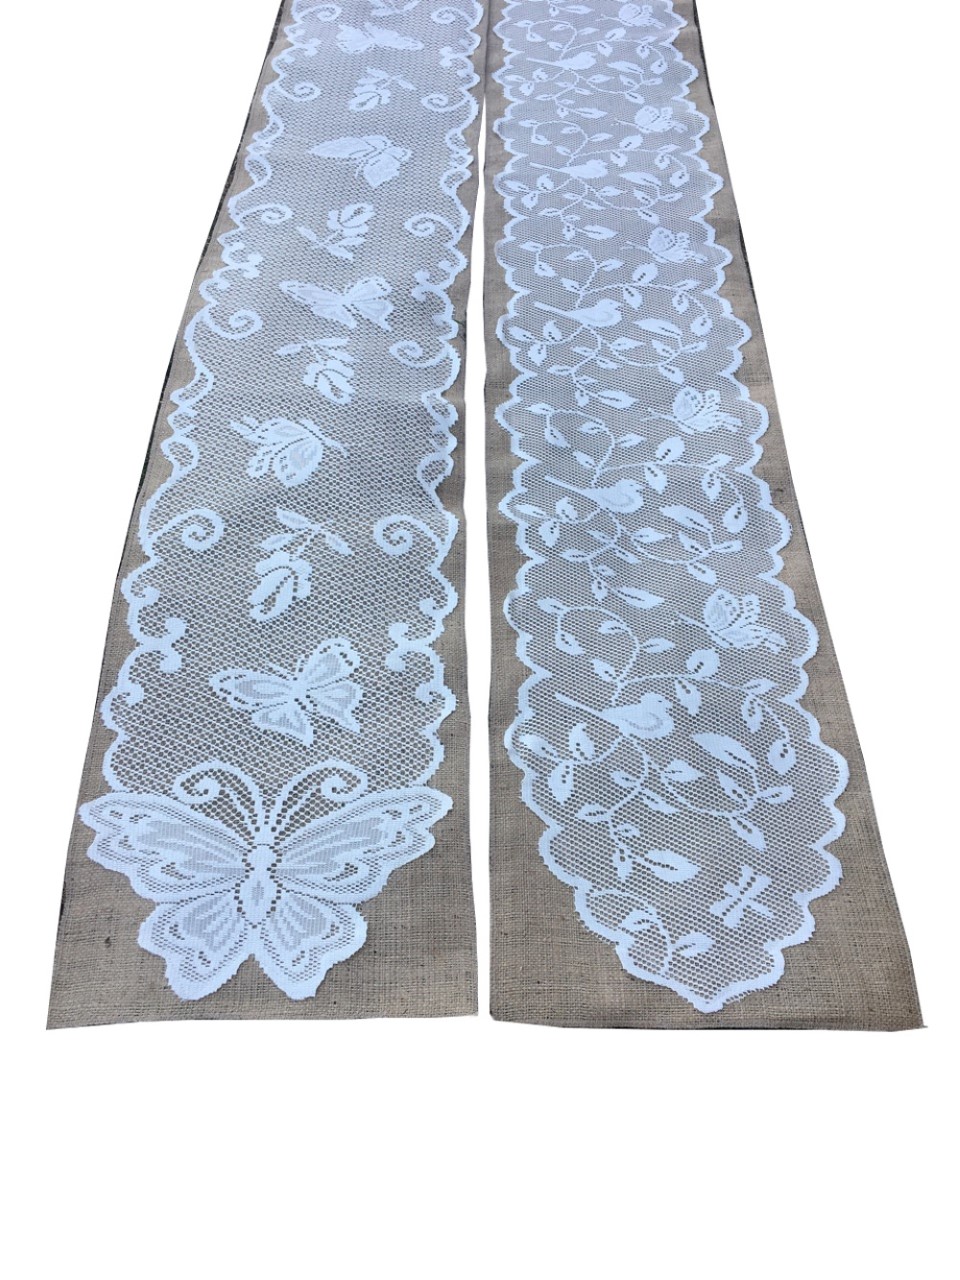 Burlap Table Runner With Lace